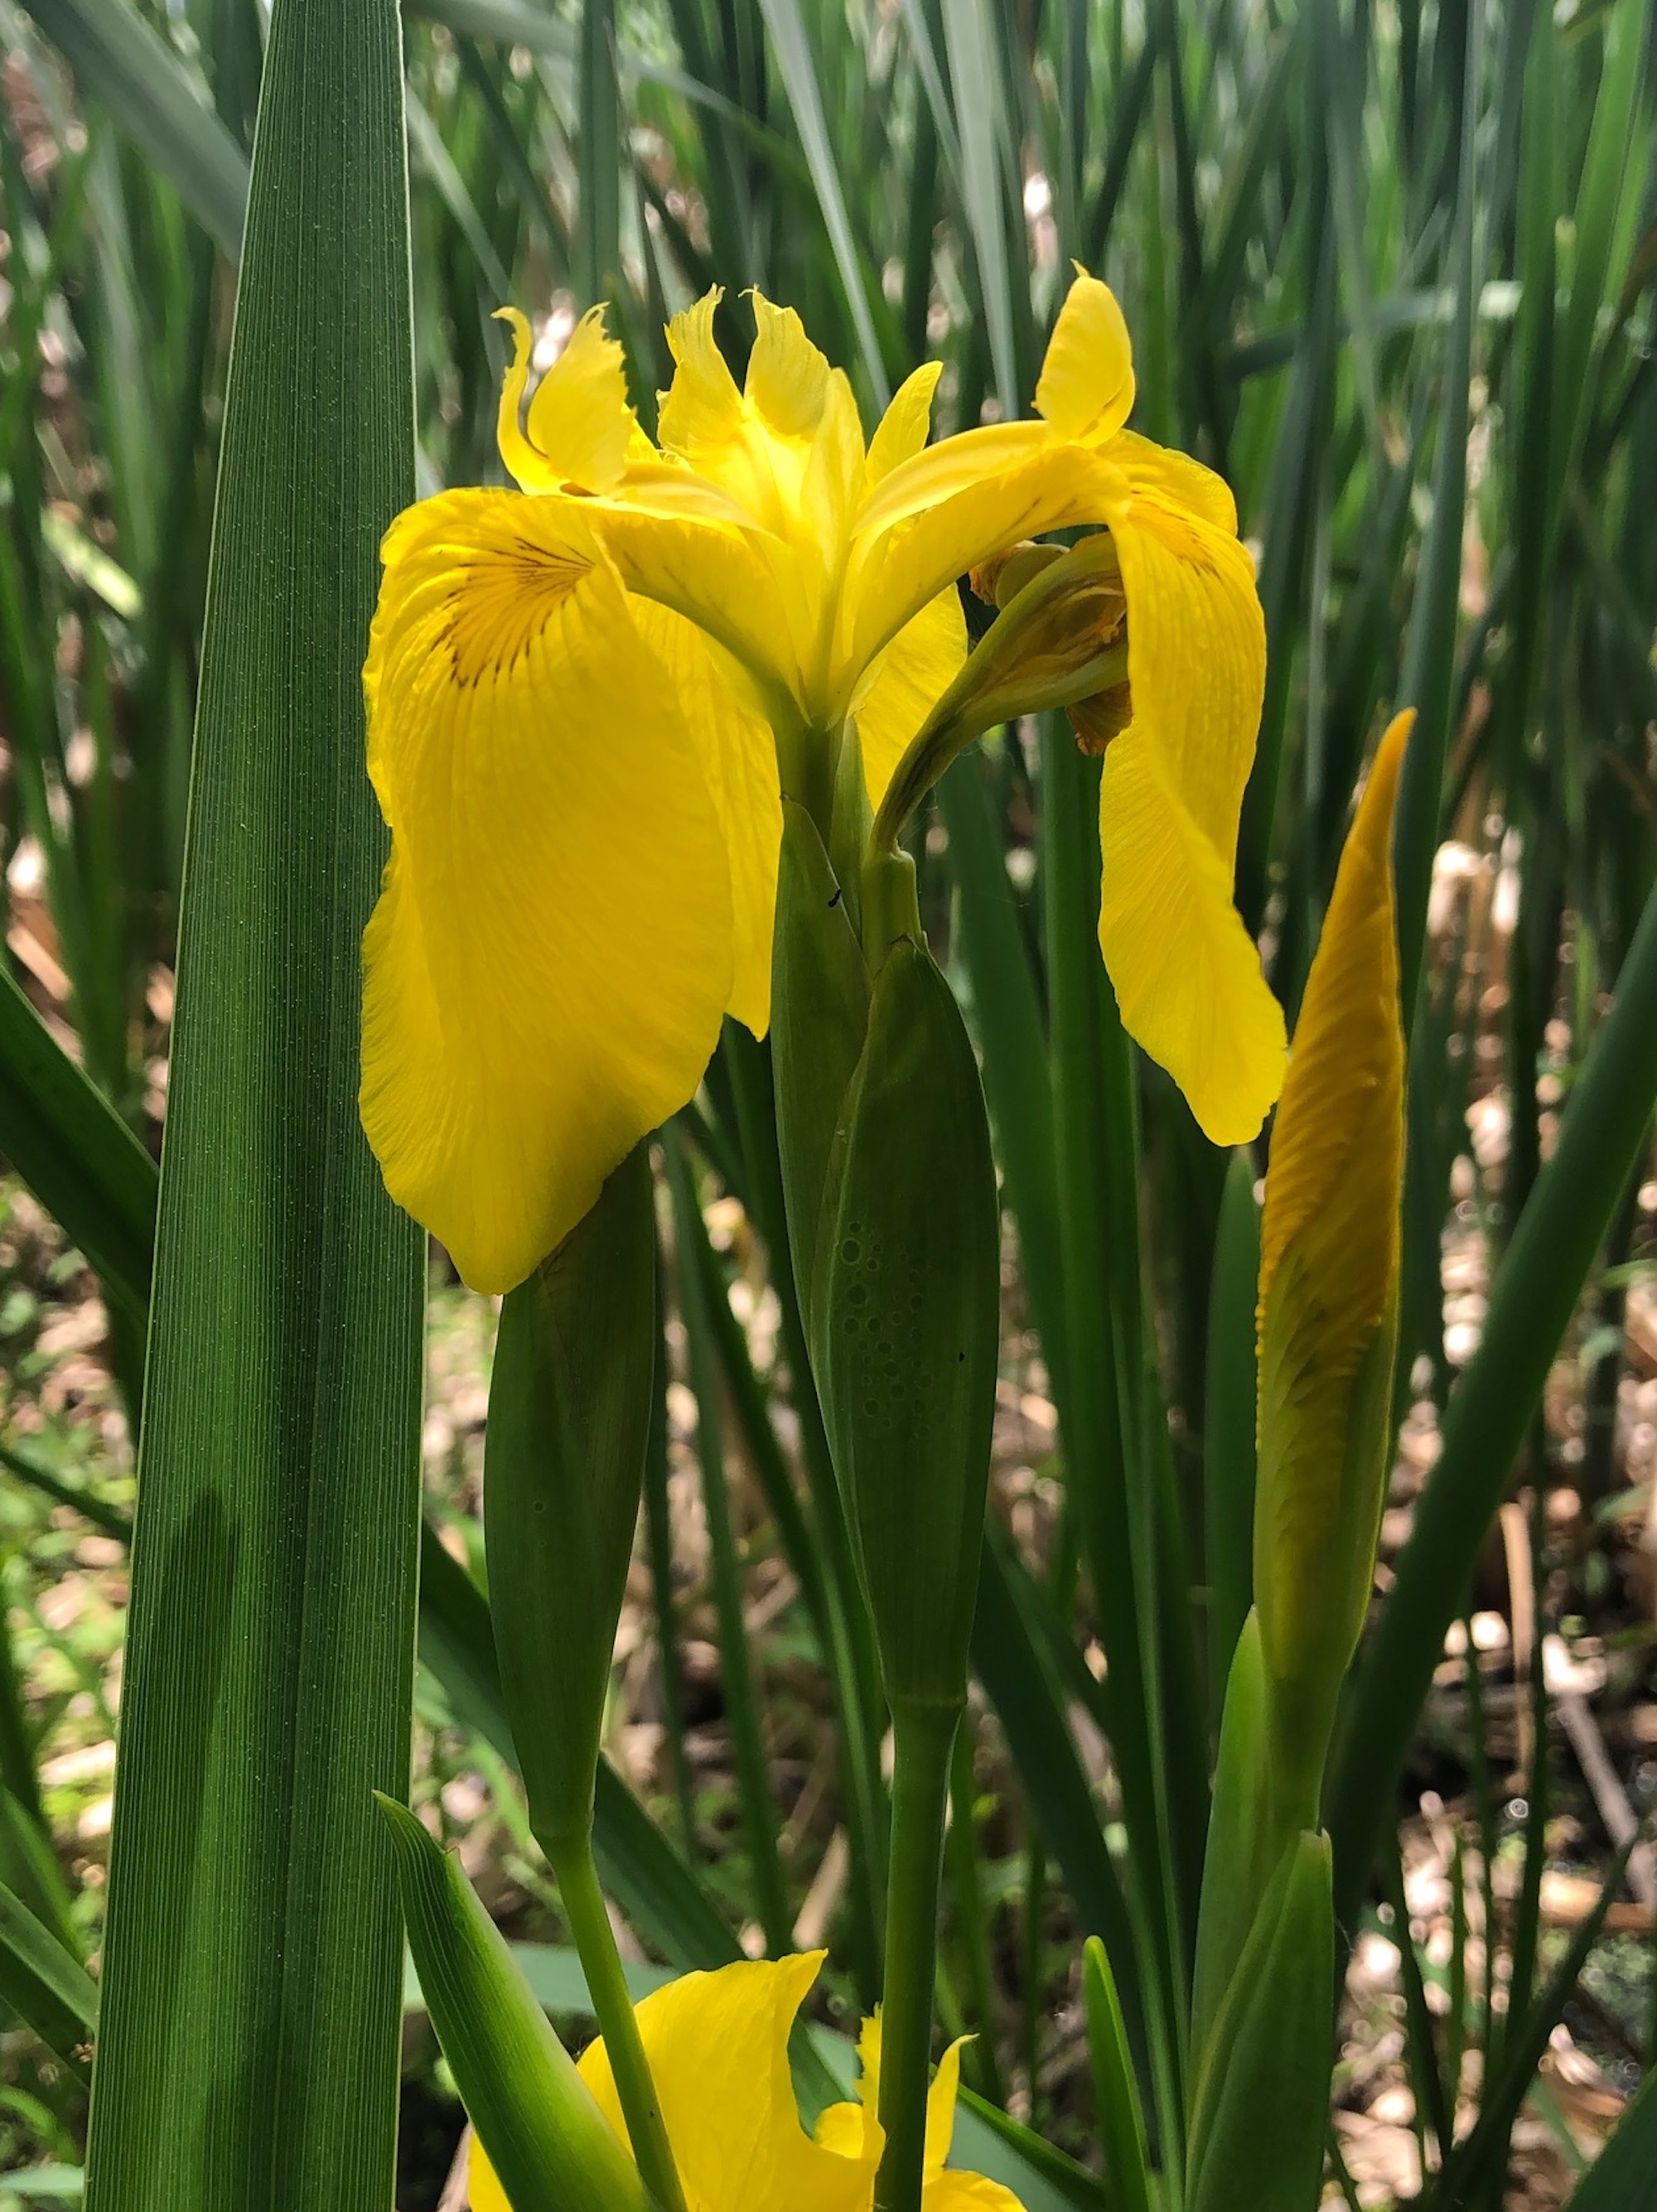 Yellow Flag Iris by Cattails on Lake Wingra on June 5, 2020.